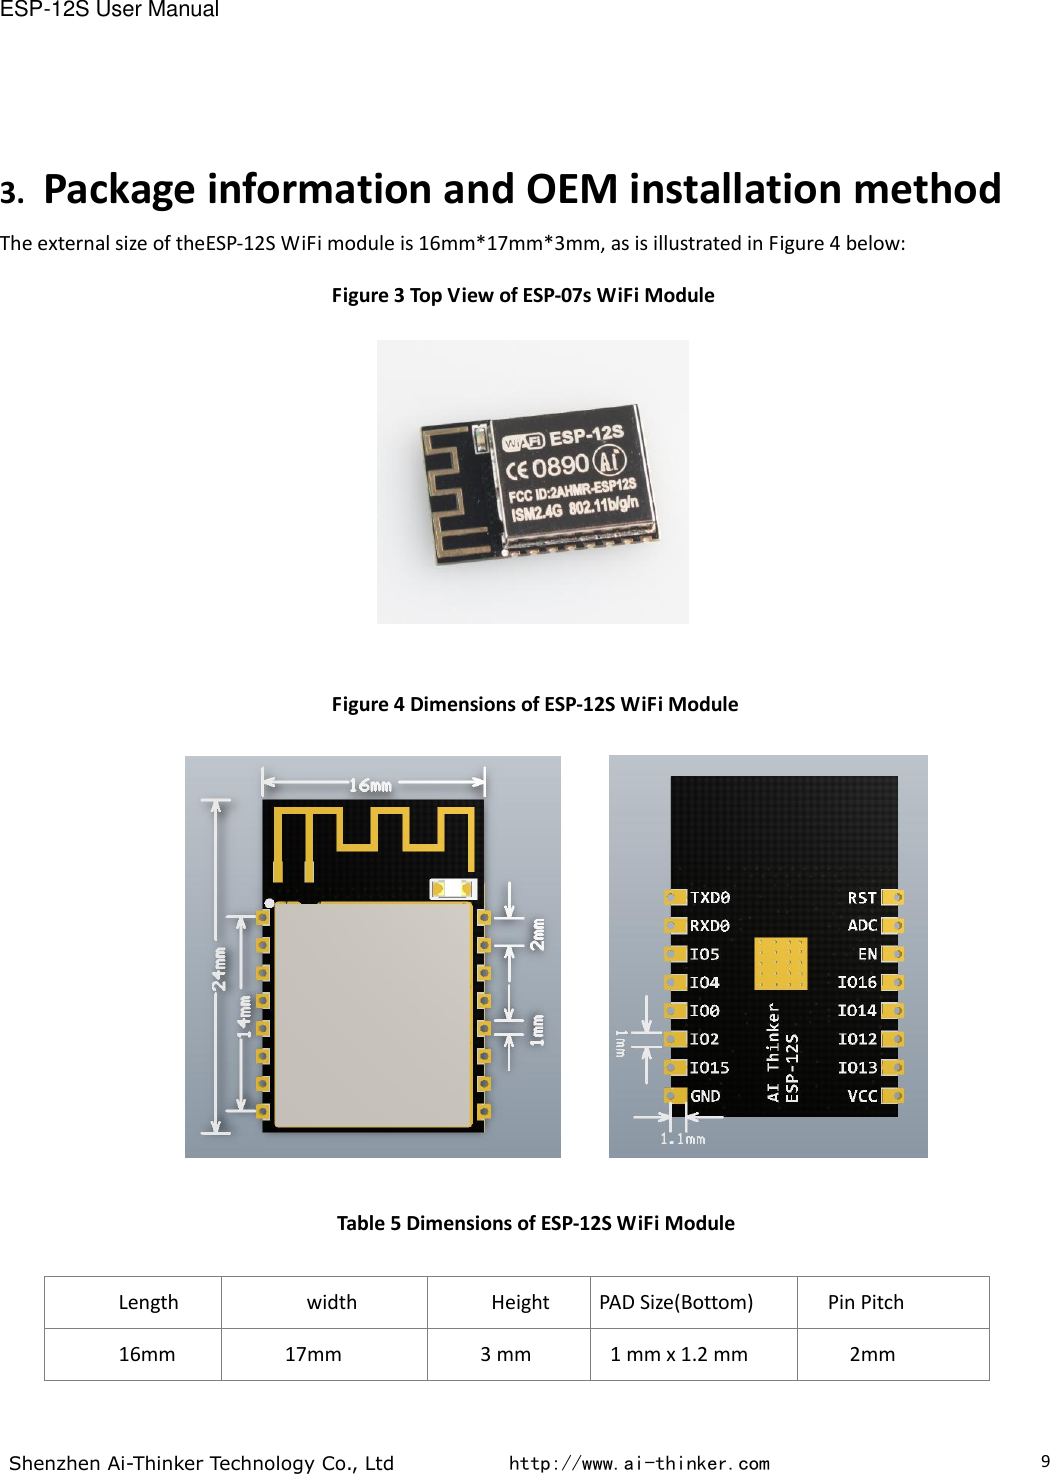 ESP-12S User Manual  Shenzhen Ai-Thinker Technology Co., Ltd           http://www.ai-thinker.com                                                                                     9 3. Package information and OEM installation method The external size of theESP-12S WiFi module is 16mm*17mm*3mm, as is illustrated in Figure 4 below: Figure 3 Top View of ESP-07s WiFi Module   Figure 4 Dimensions of ESP-12S WiFi Module        Table 5 Dimensions of ESP-12S WiFi Module  Length width Height PAD Size(Bottom) Pin Pitch 16mm 17mm 3 mm 1 mm x 1.2 mm 2mm  